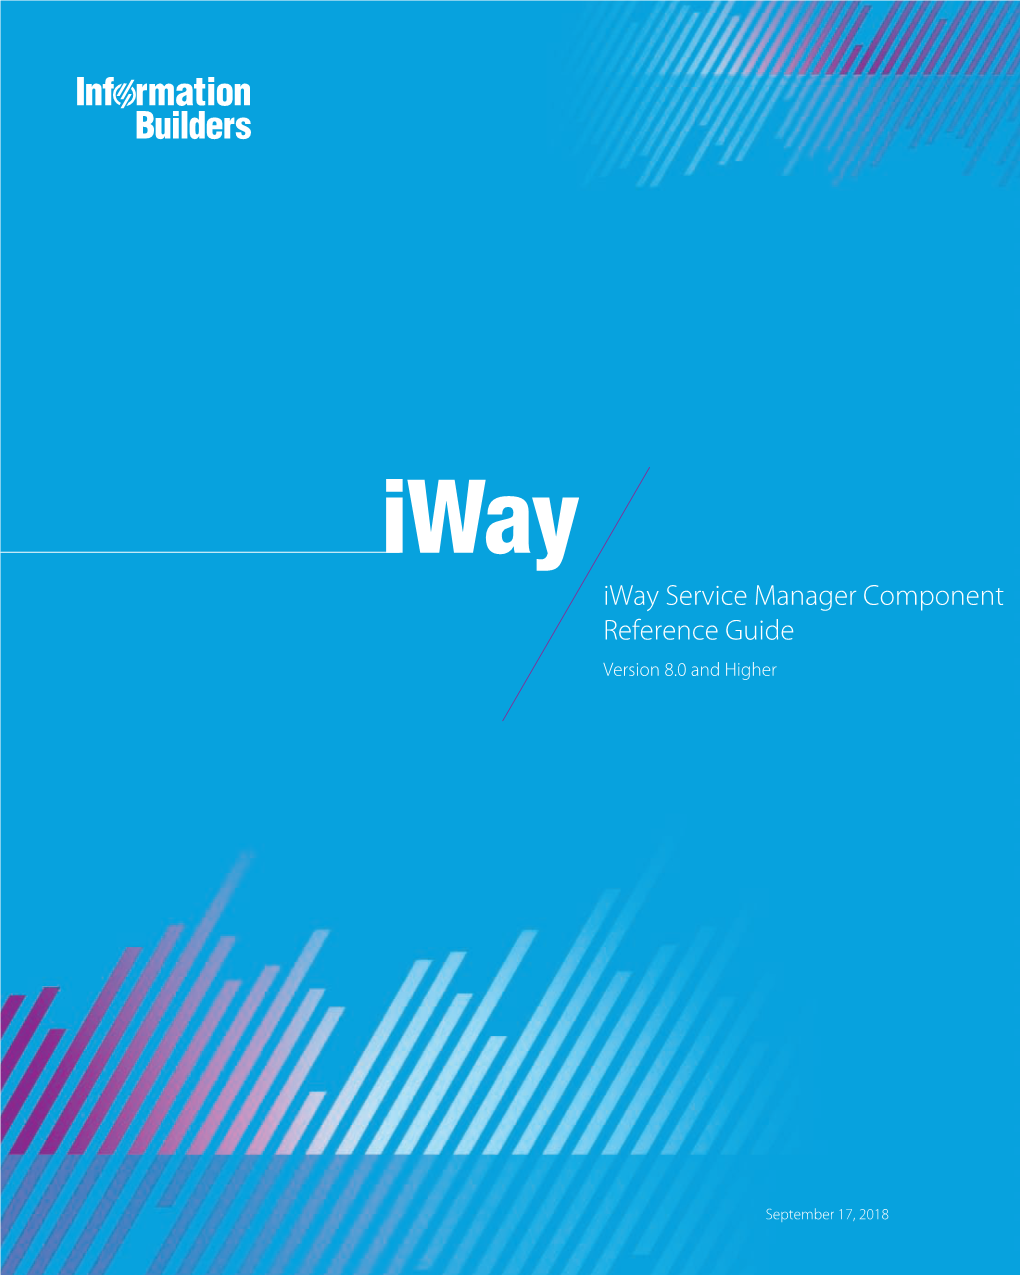 Iway Service Manager Component Reference Guide Version 8.0 and Higher